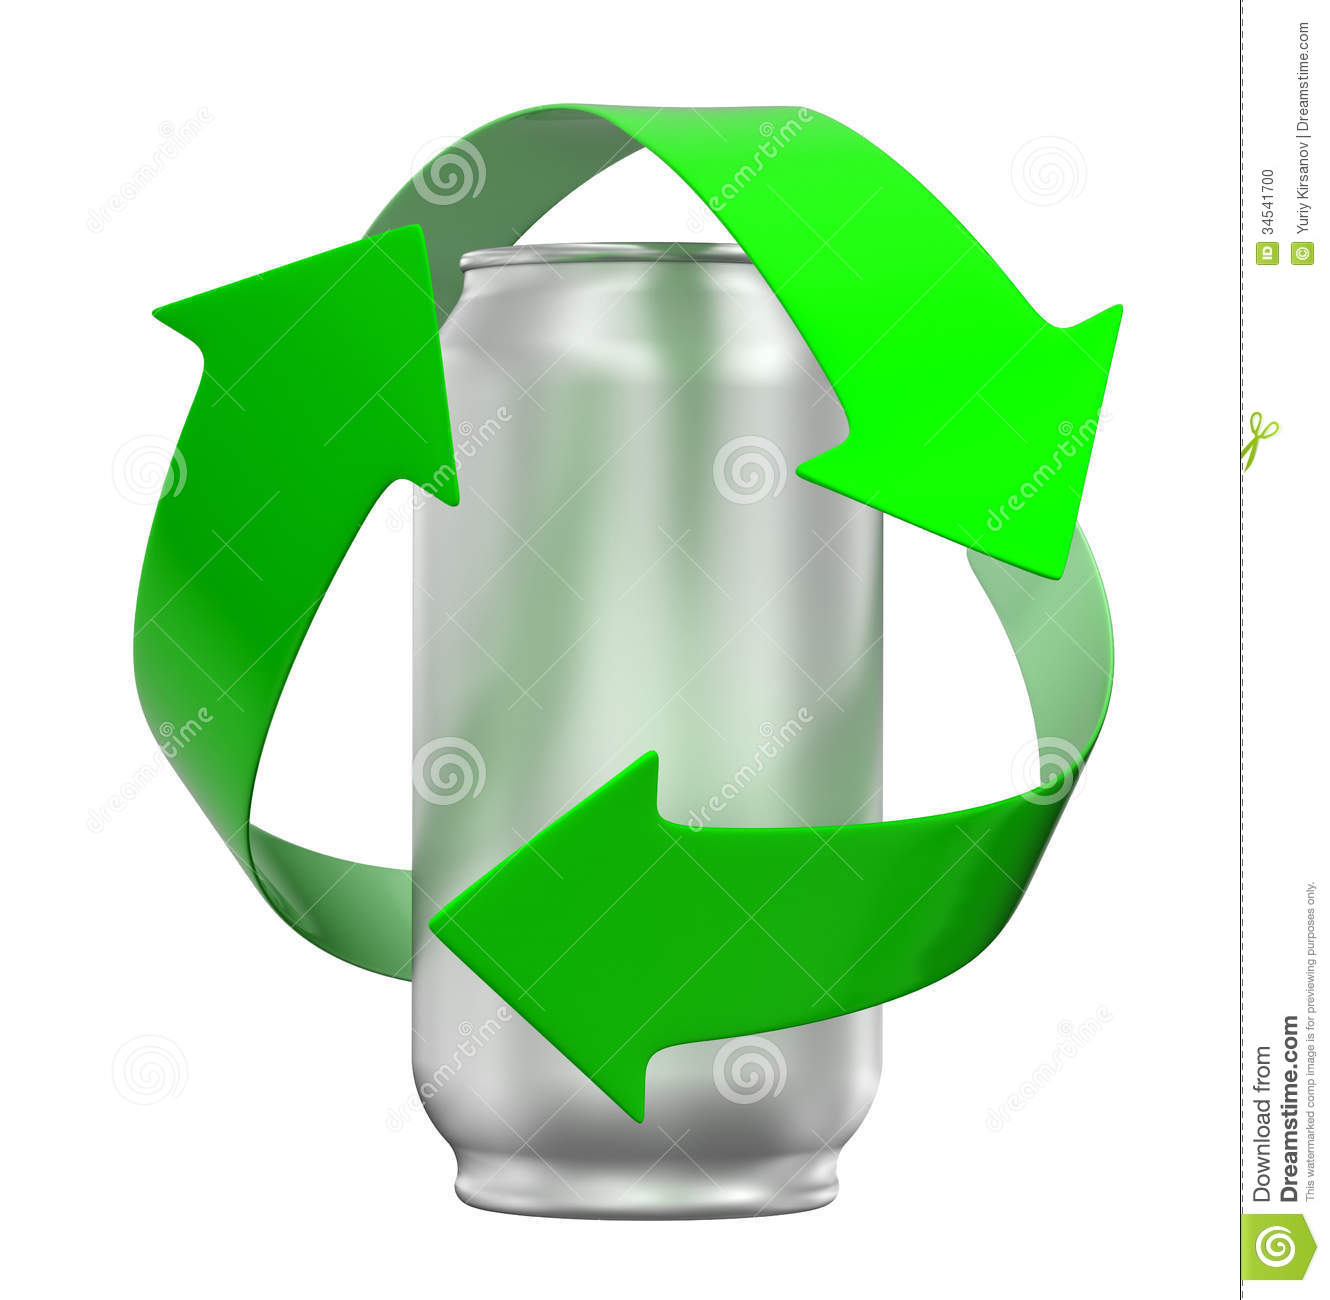 Recycling Can Stock Photo   Image  34541700